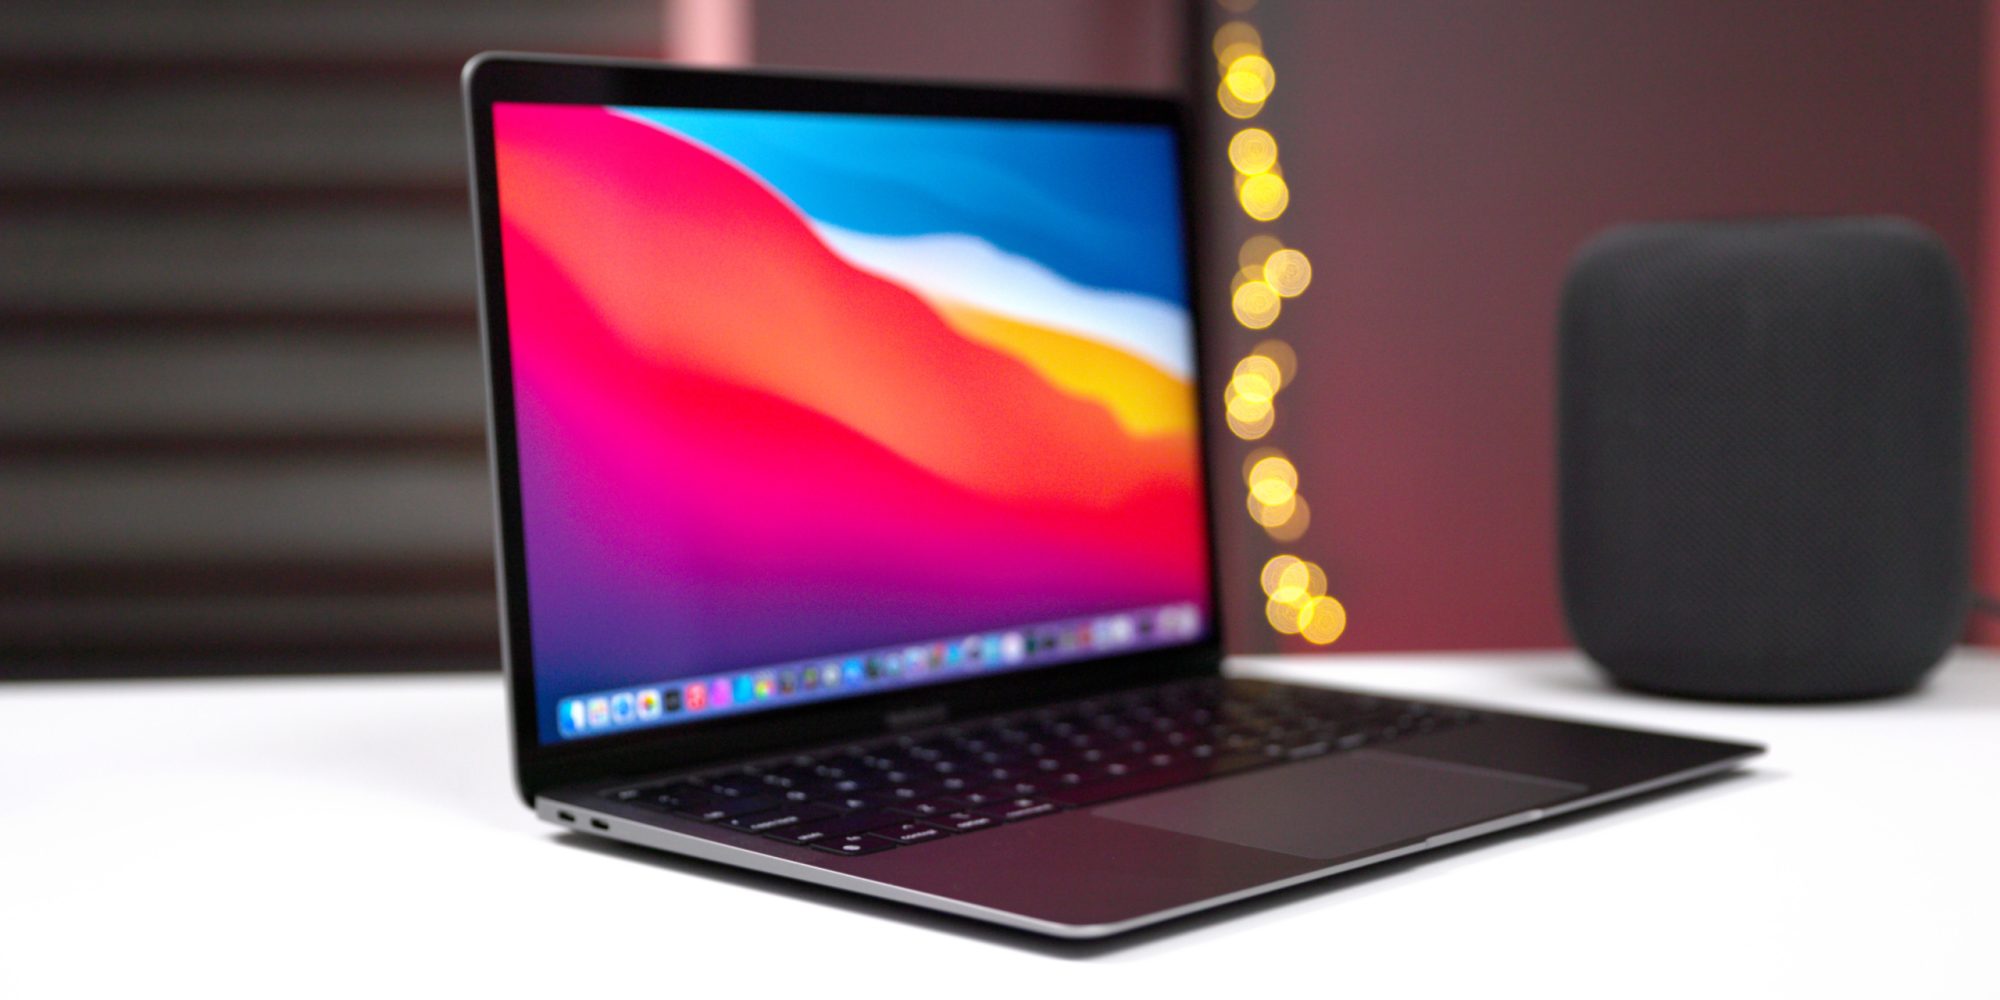 Apple's M1 13-inch MacBook Air 512GB falls to new Amazon low at 